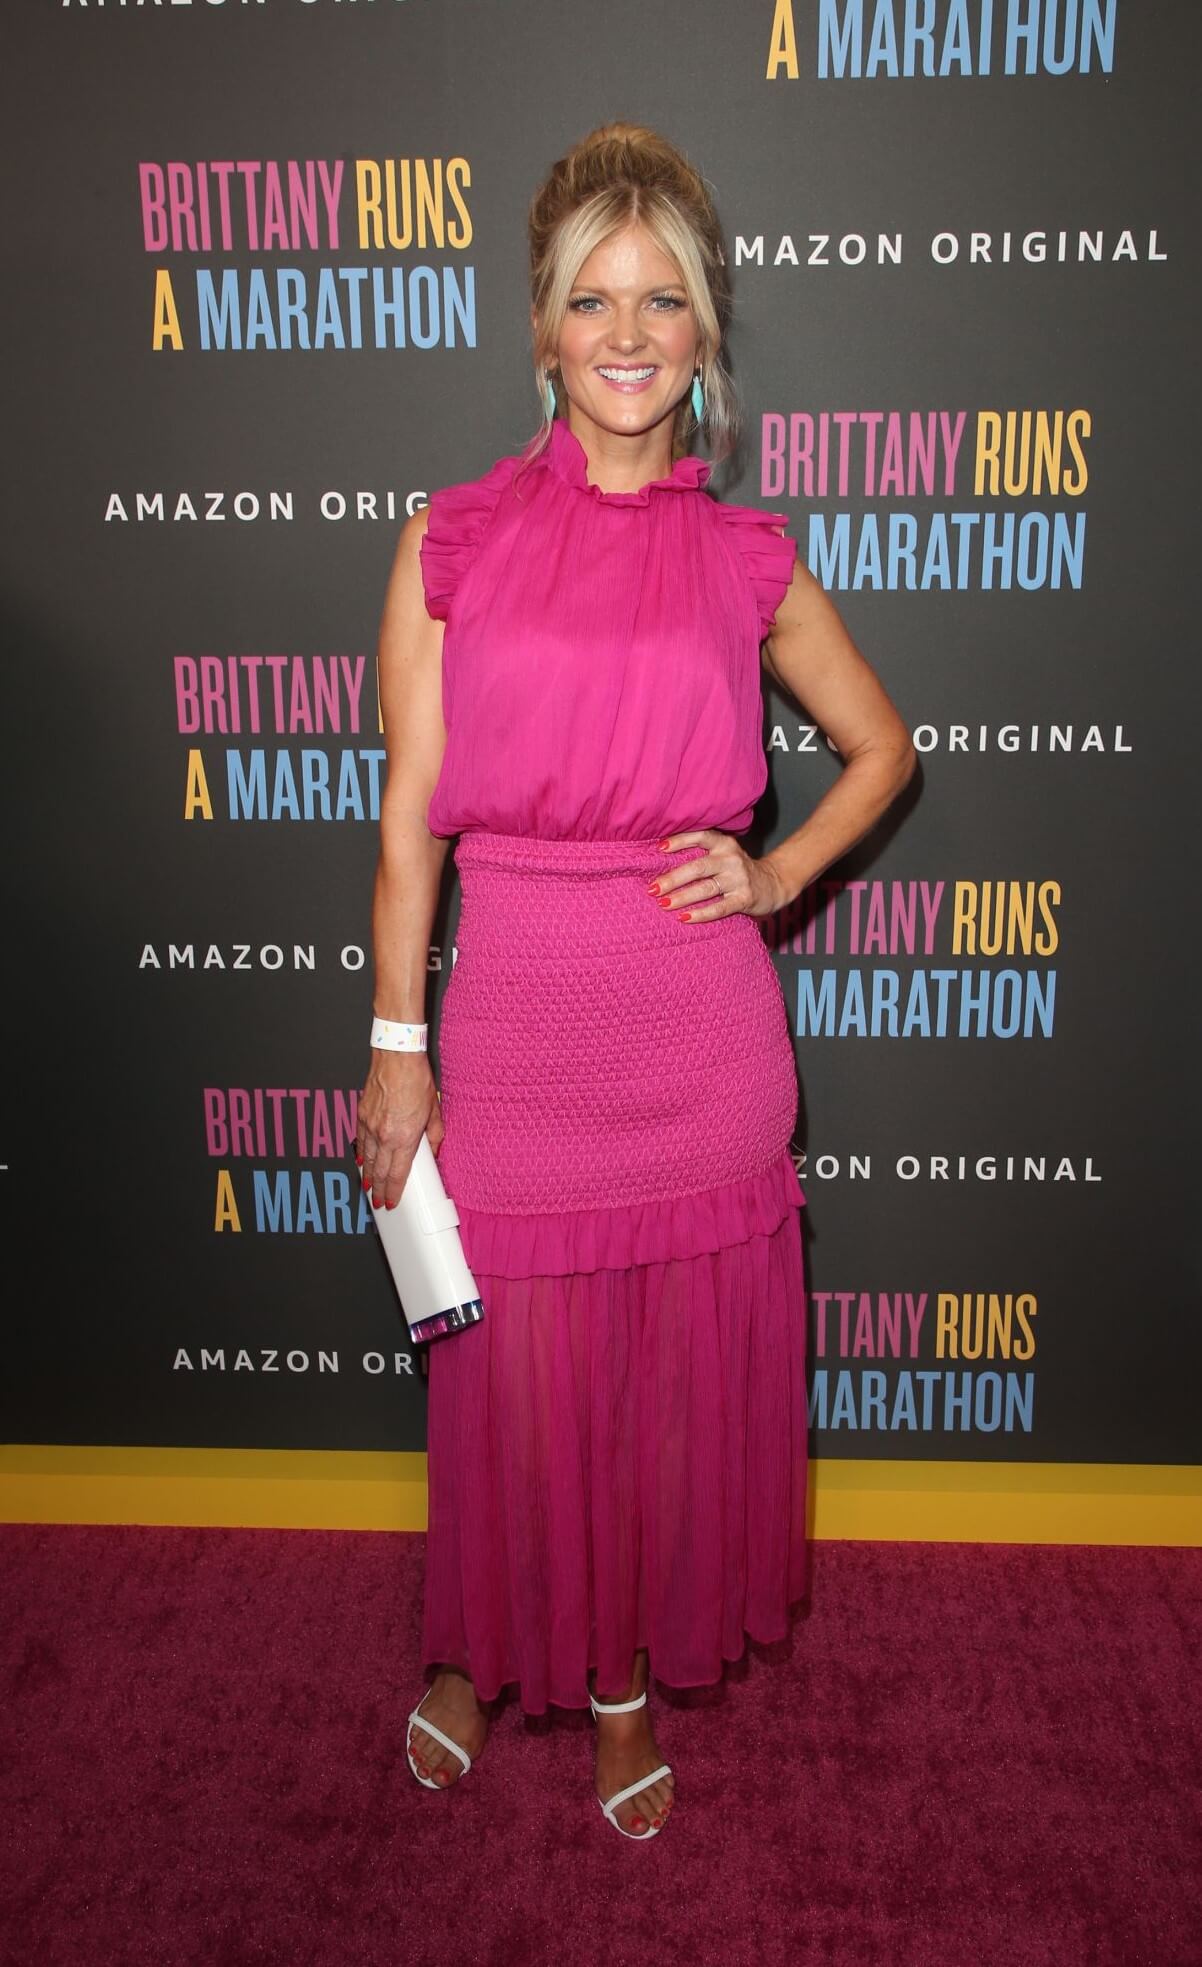 Arden Myrin In Pink Ruffle Long Dress With White Clutch At“Brittany Runs A Marathon” Premiere in LA